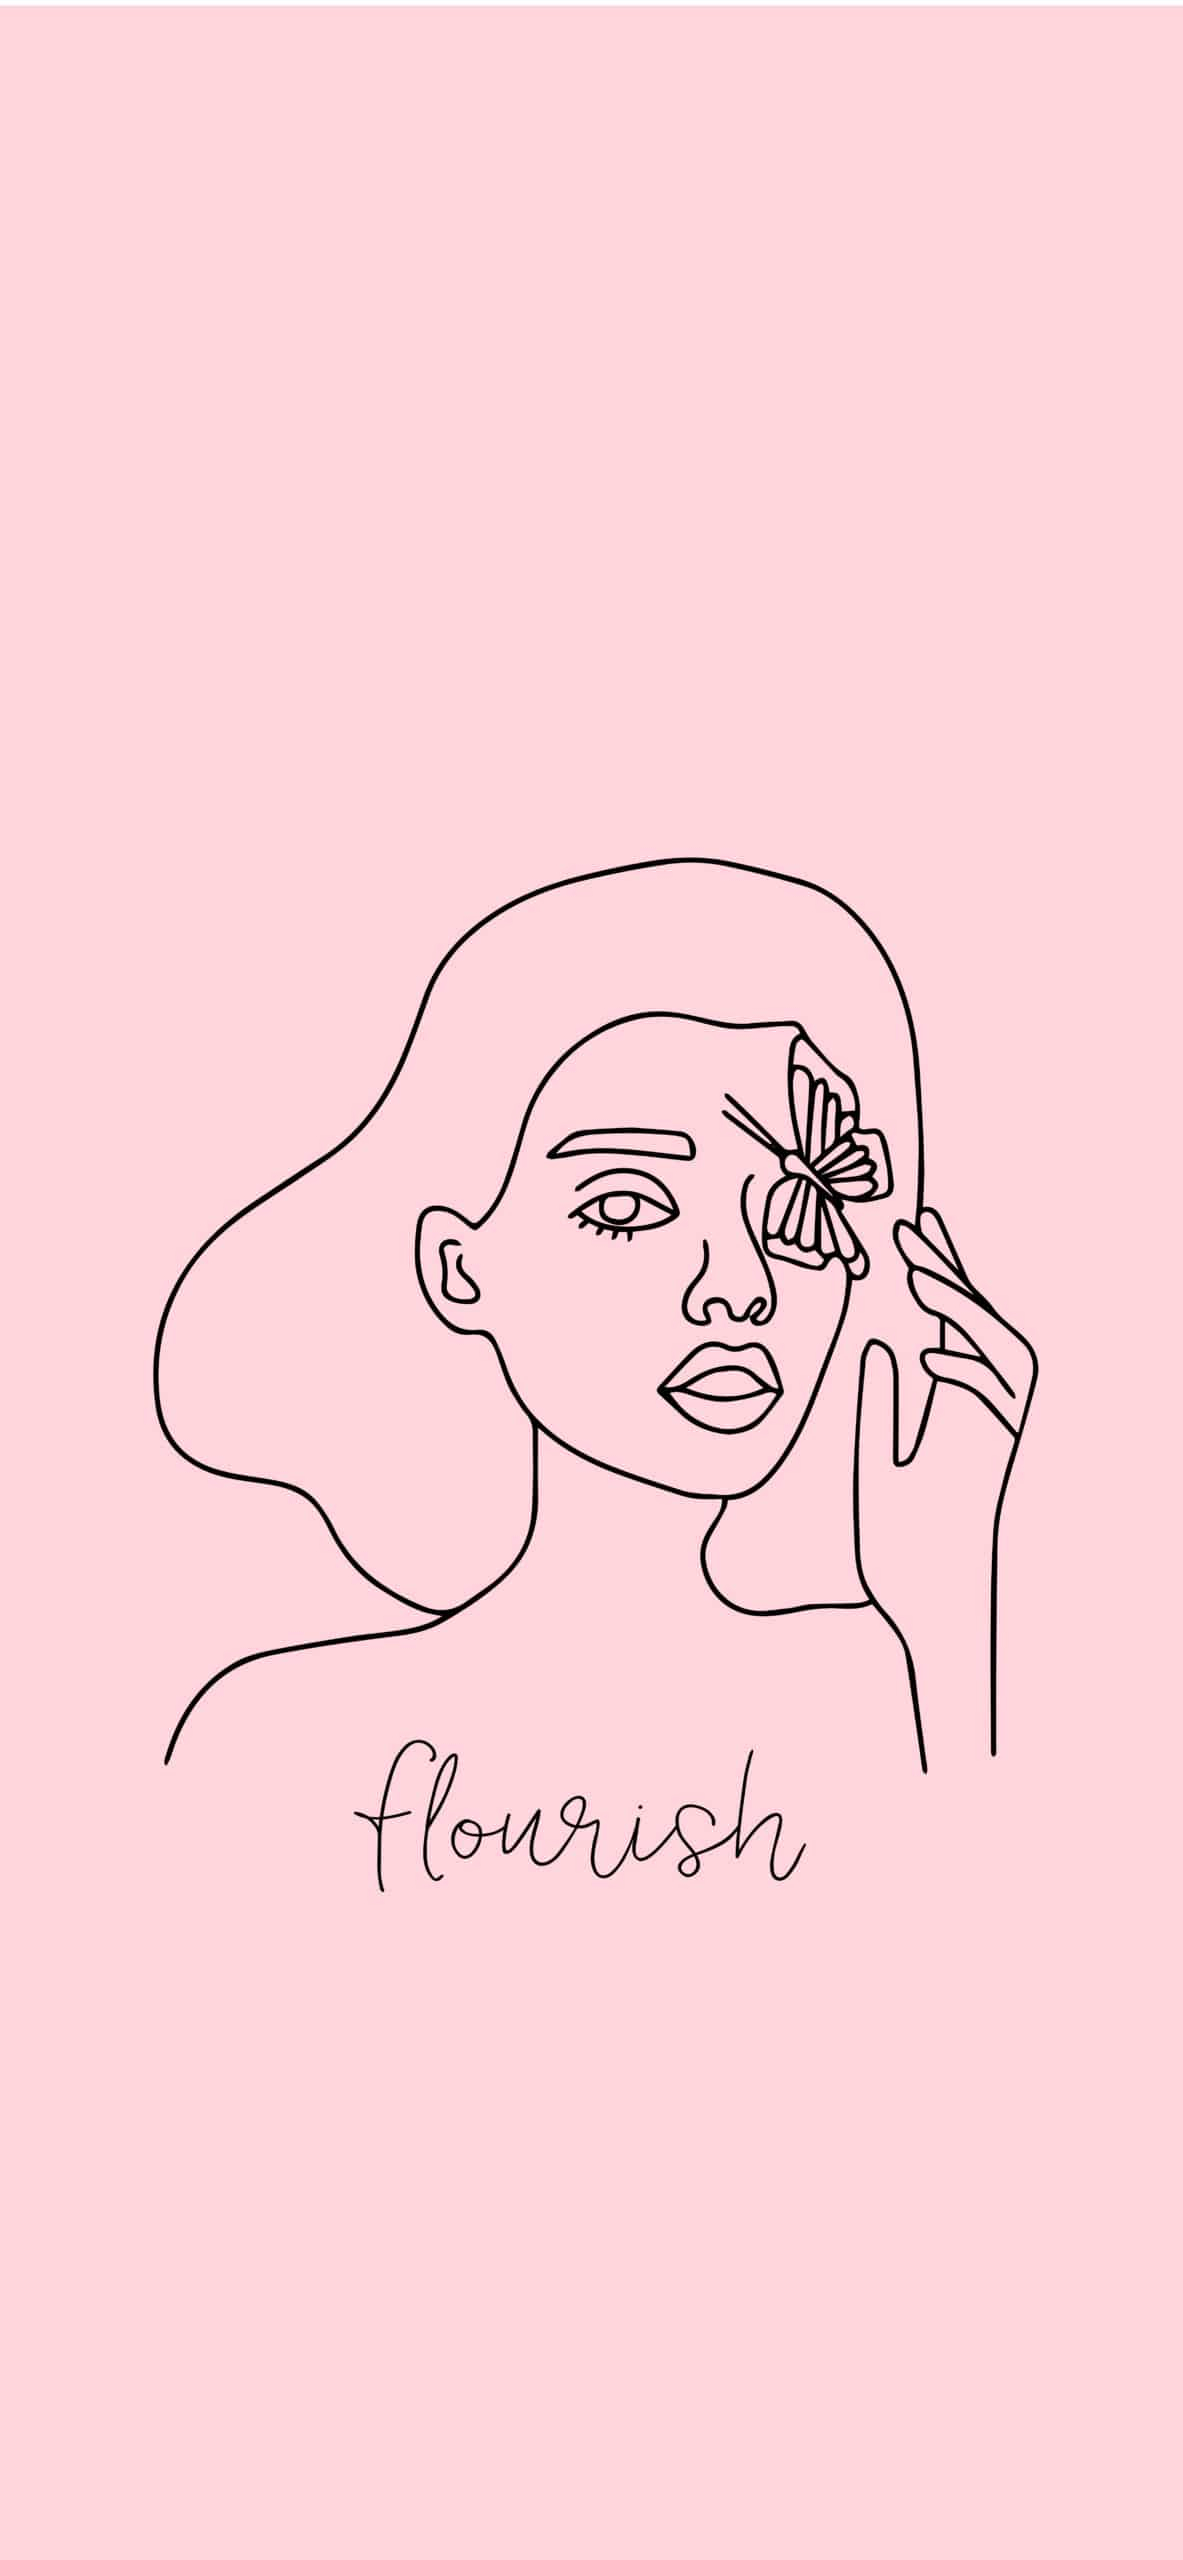 1183x2560 12 Stunning Line Art Girl iPhone Wallpaper and Wall Art You Need To Get